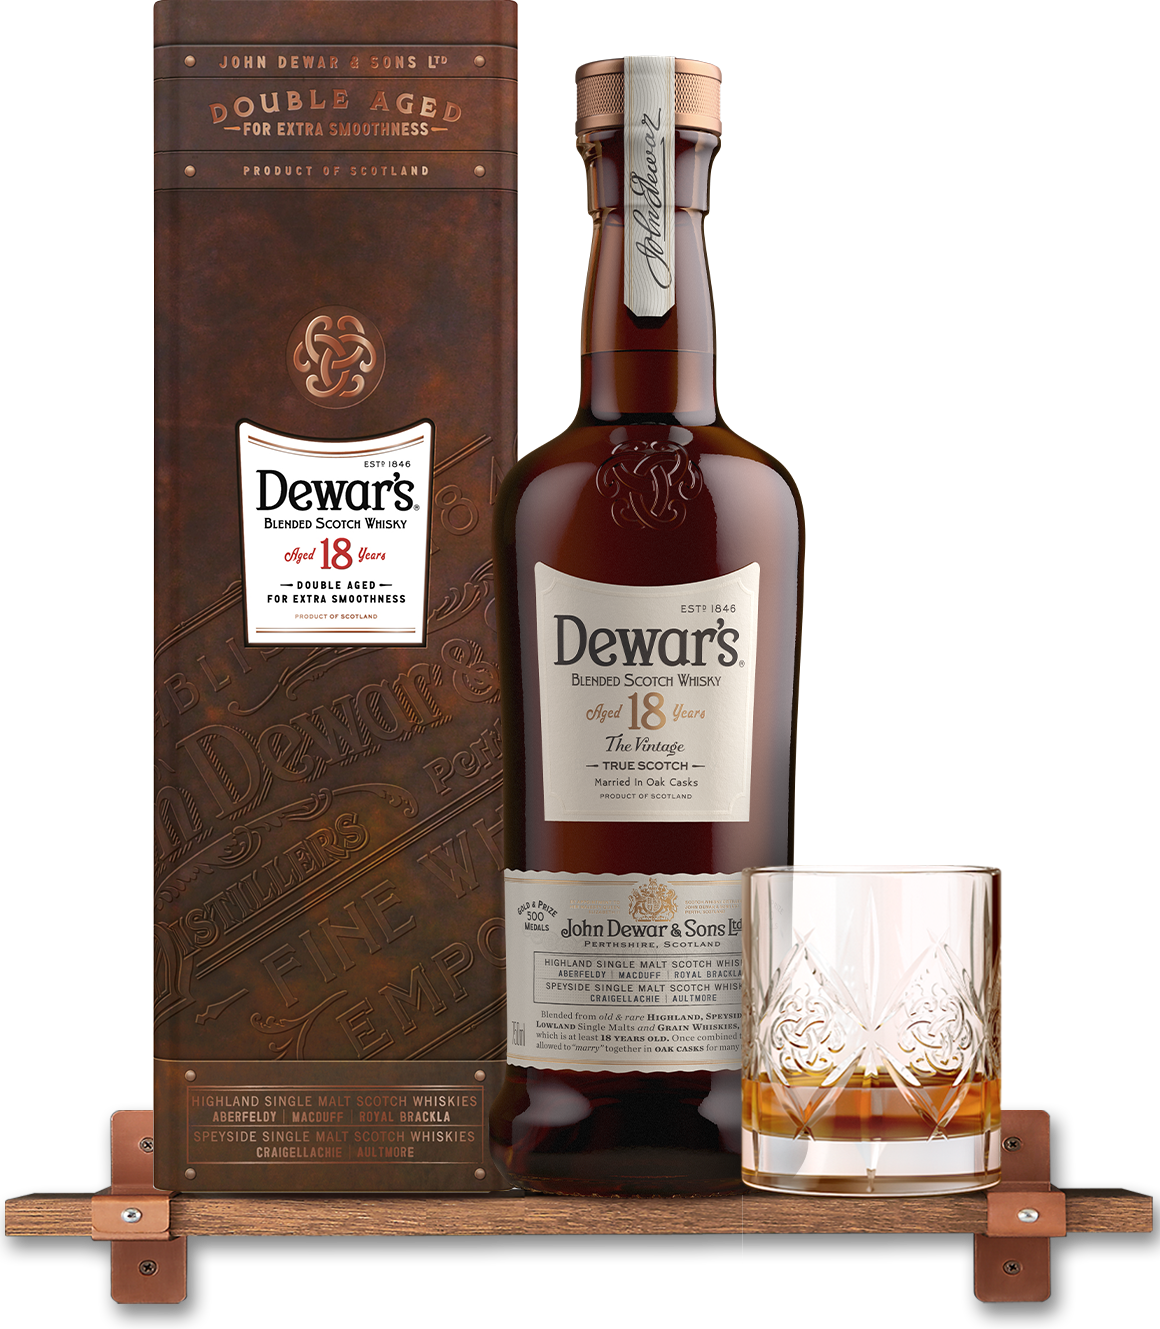 A somewhat indulgent after-dinner drama, Dewar's richly-flavored 18-year-old blended Scotch whiskey has won accolades the world over since its introduction to the collection in 2003.